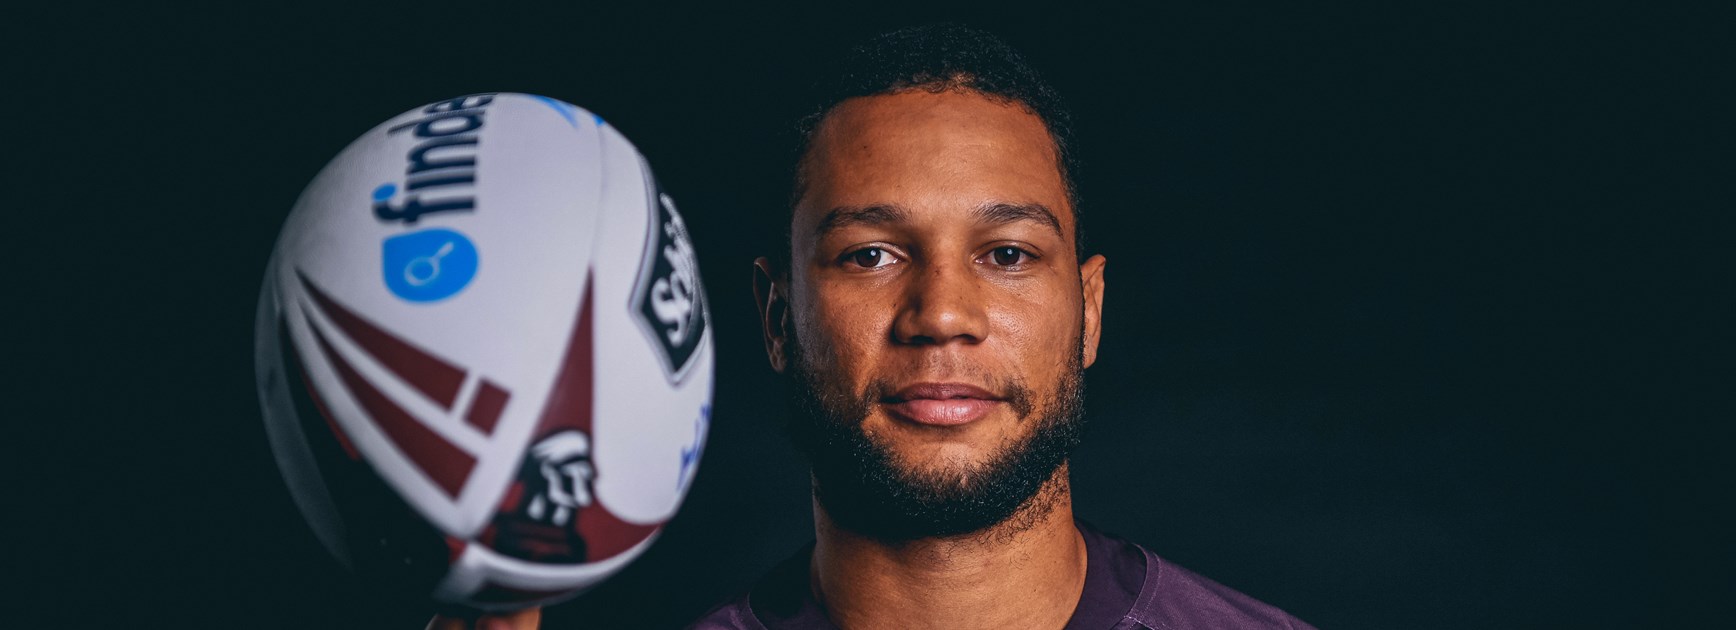 From Pirate days to Origin gaze: Mbye's road to Maroon